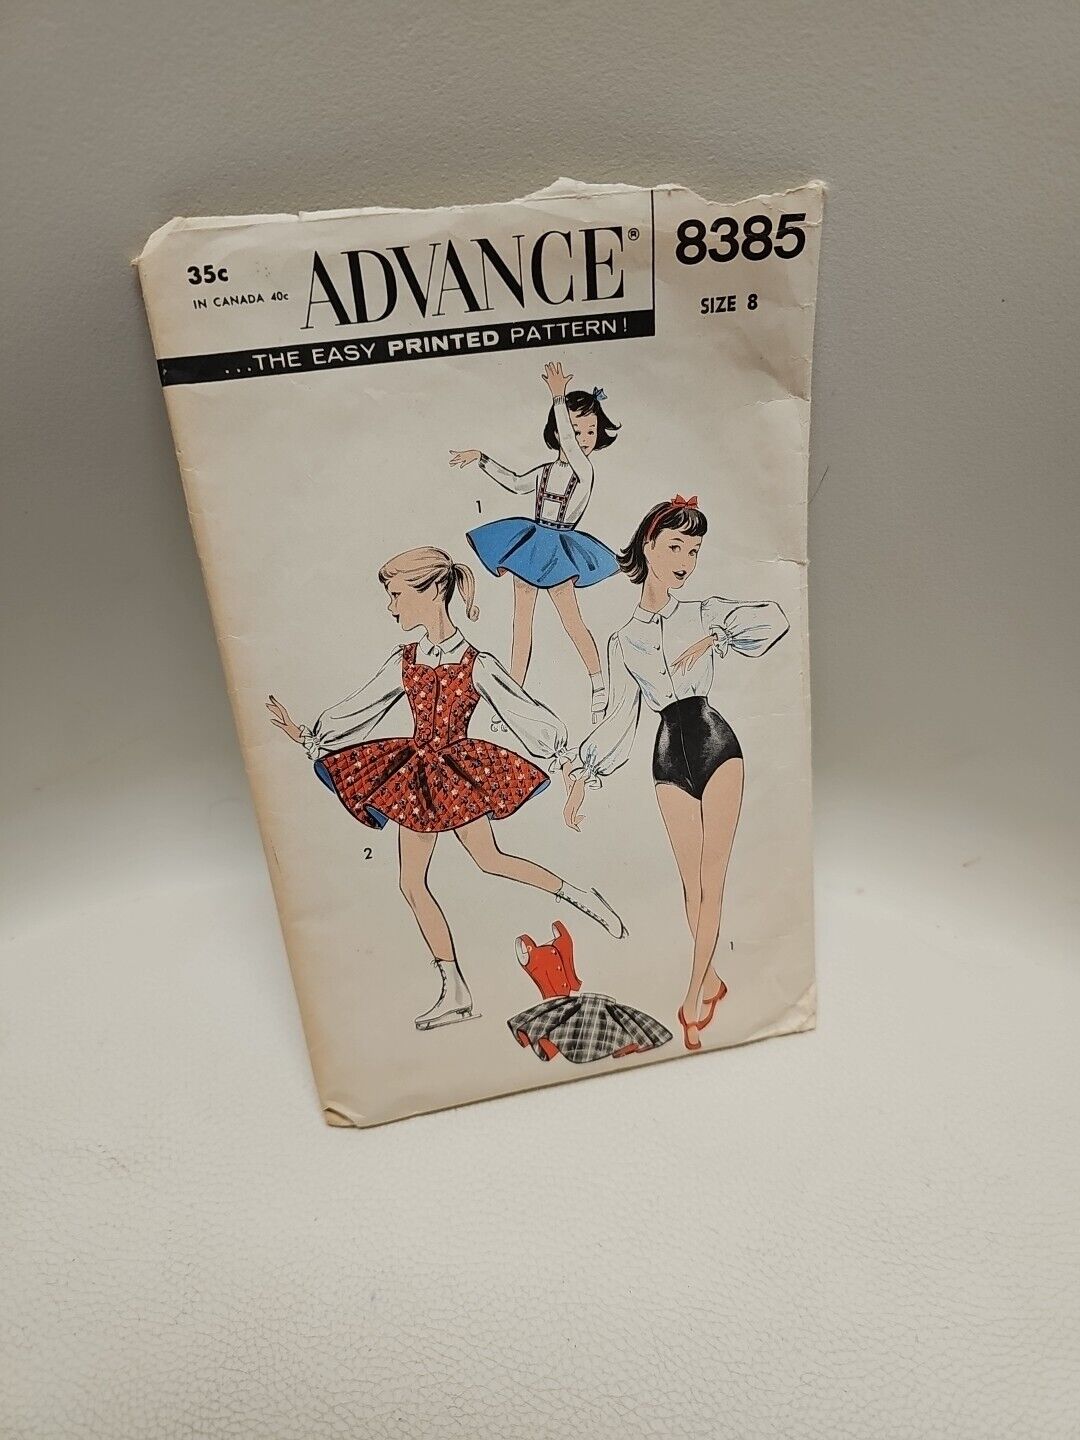 Rare Advance 8385 sewing pattern 50's Skating DANCE Ballet sew size 8